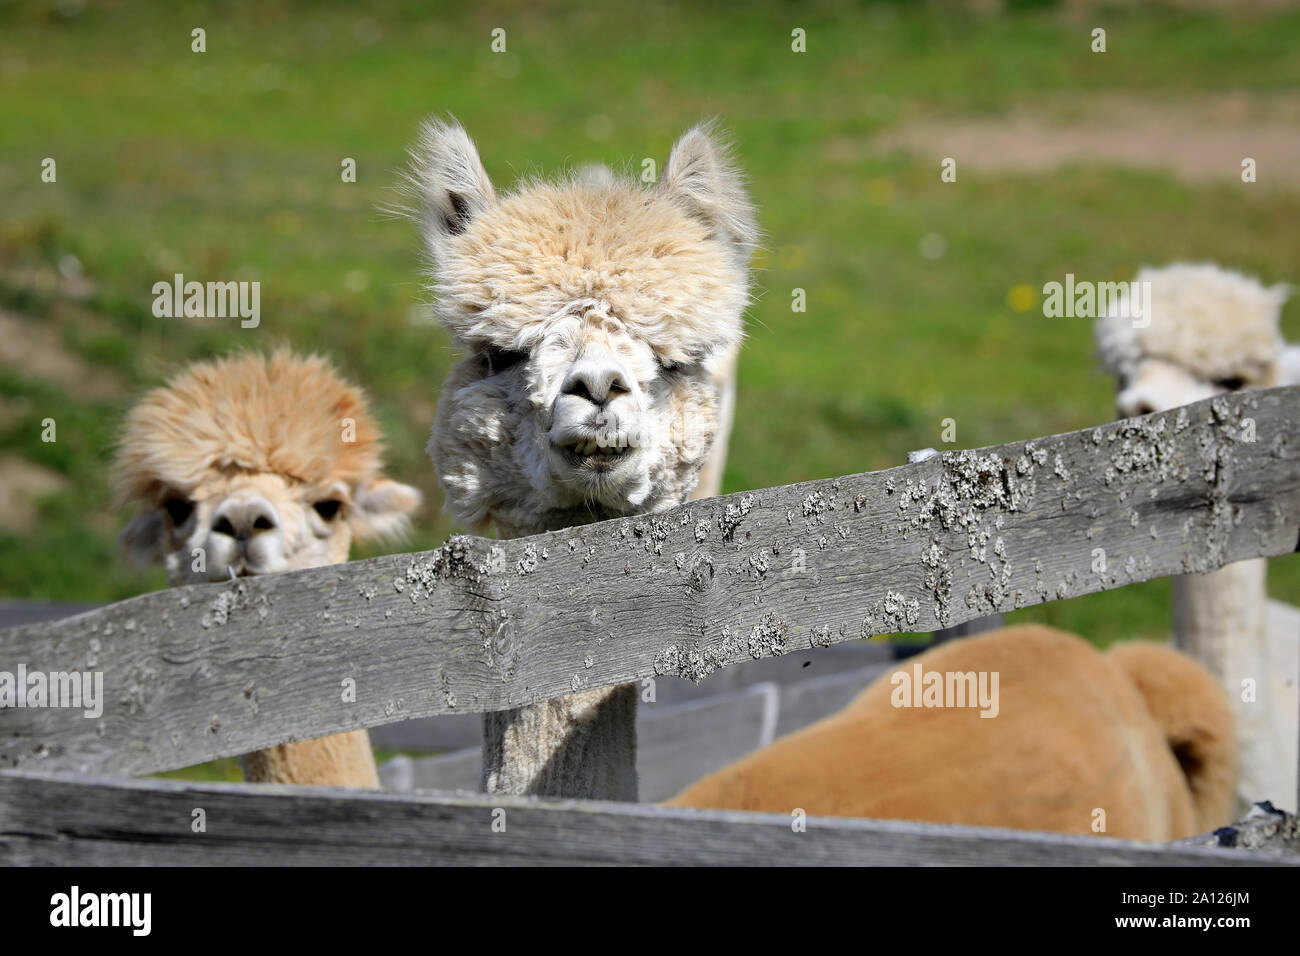 Cute and curious young Alpaca peeks over a wooden fence at a farm on a sunny day of summer. Alpacas are friendly and social herd animals. Stock Photo